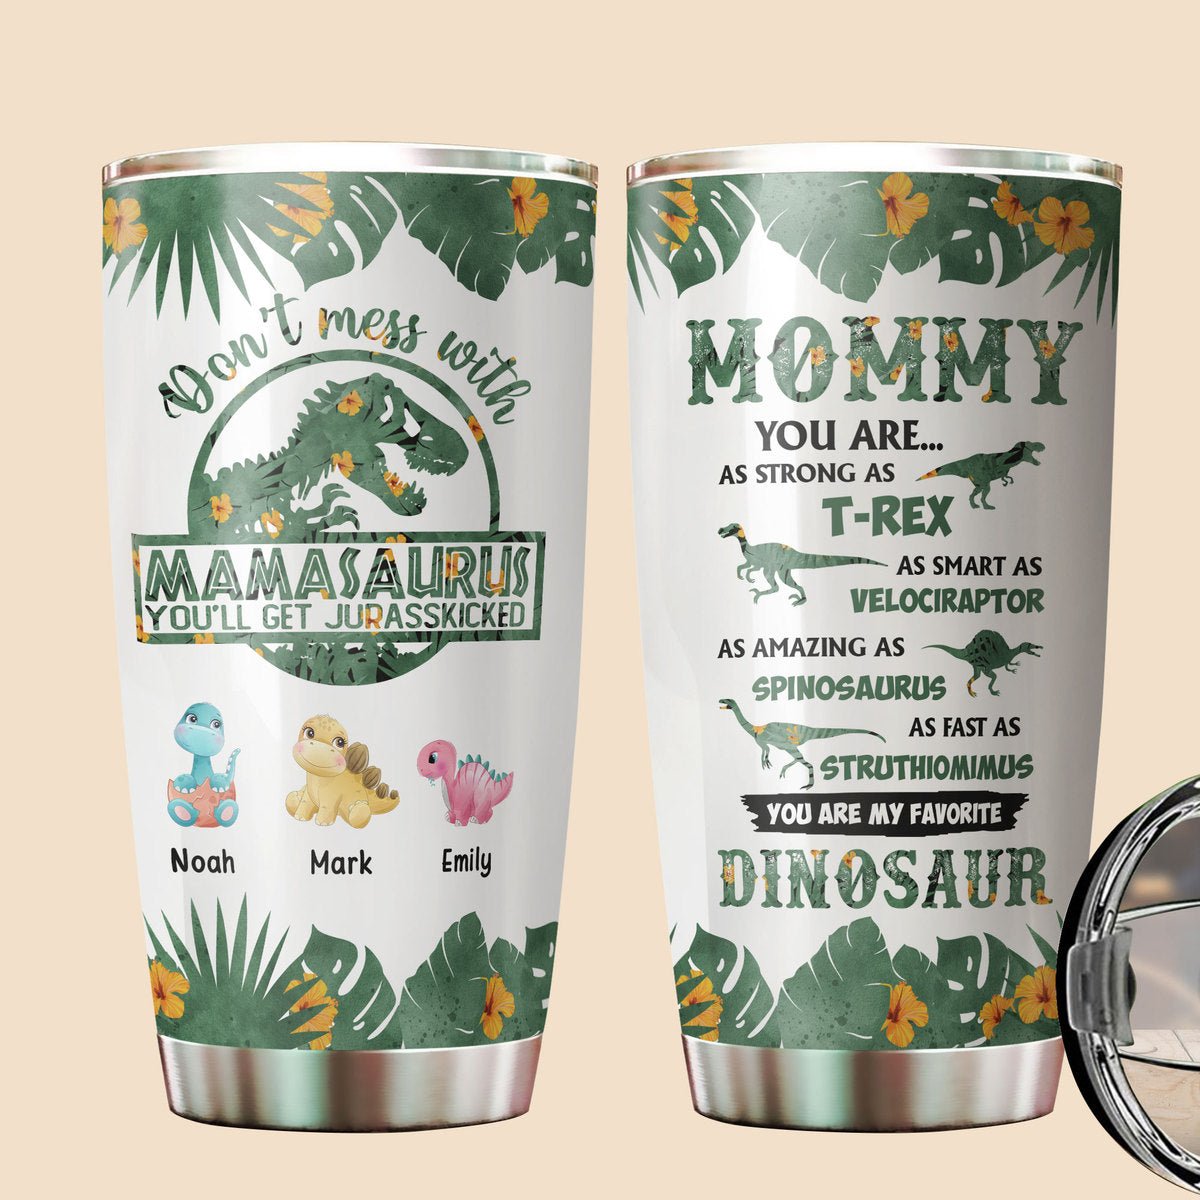 Personalized Tumbler - Mamasaurus With Green Tropical Pattern